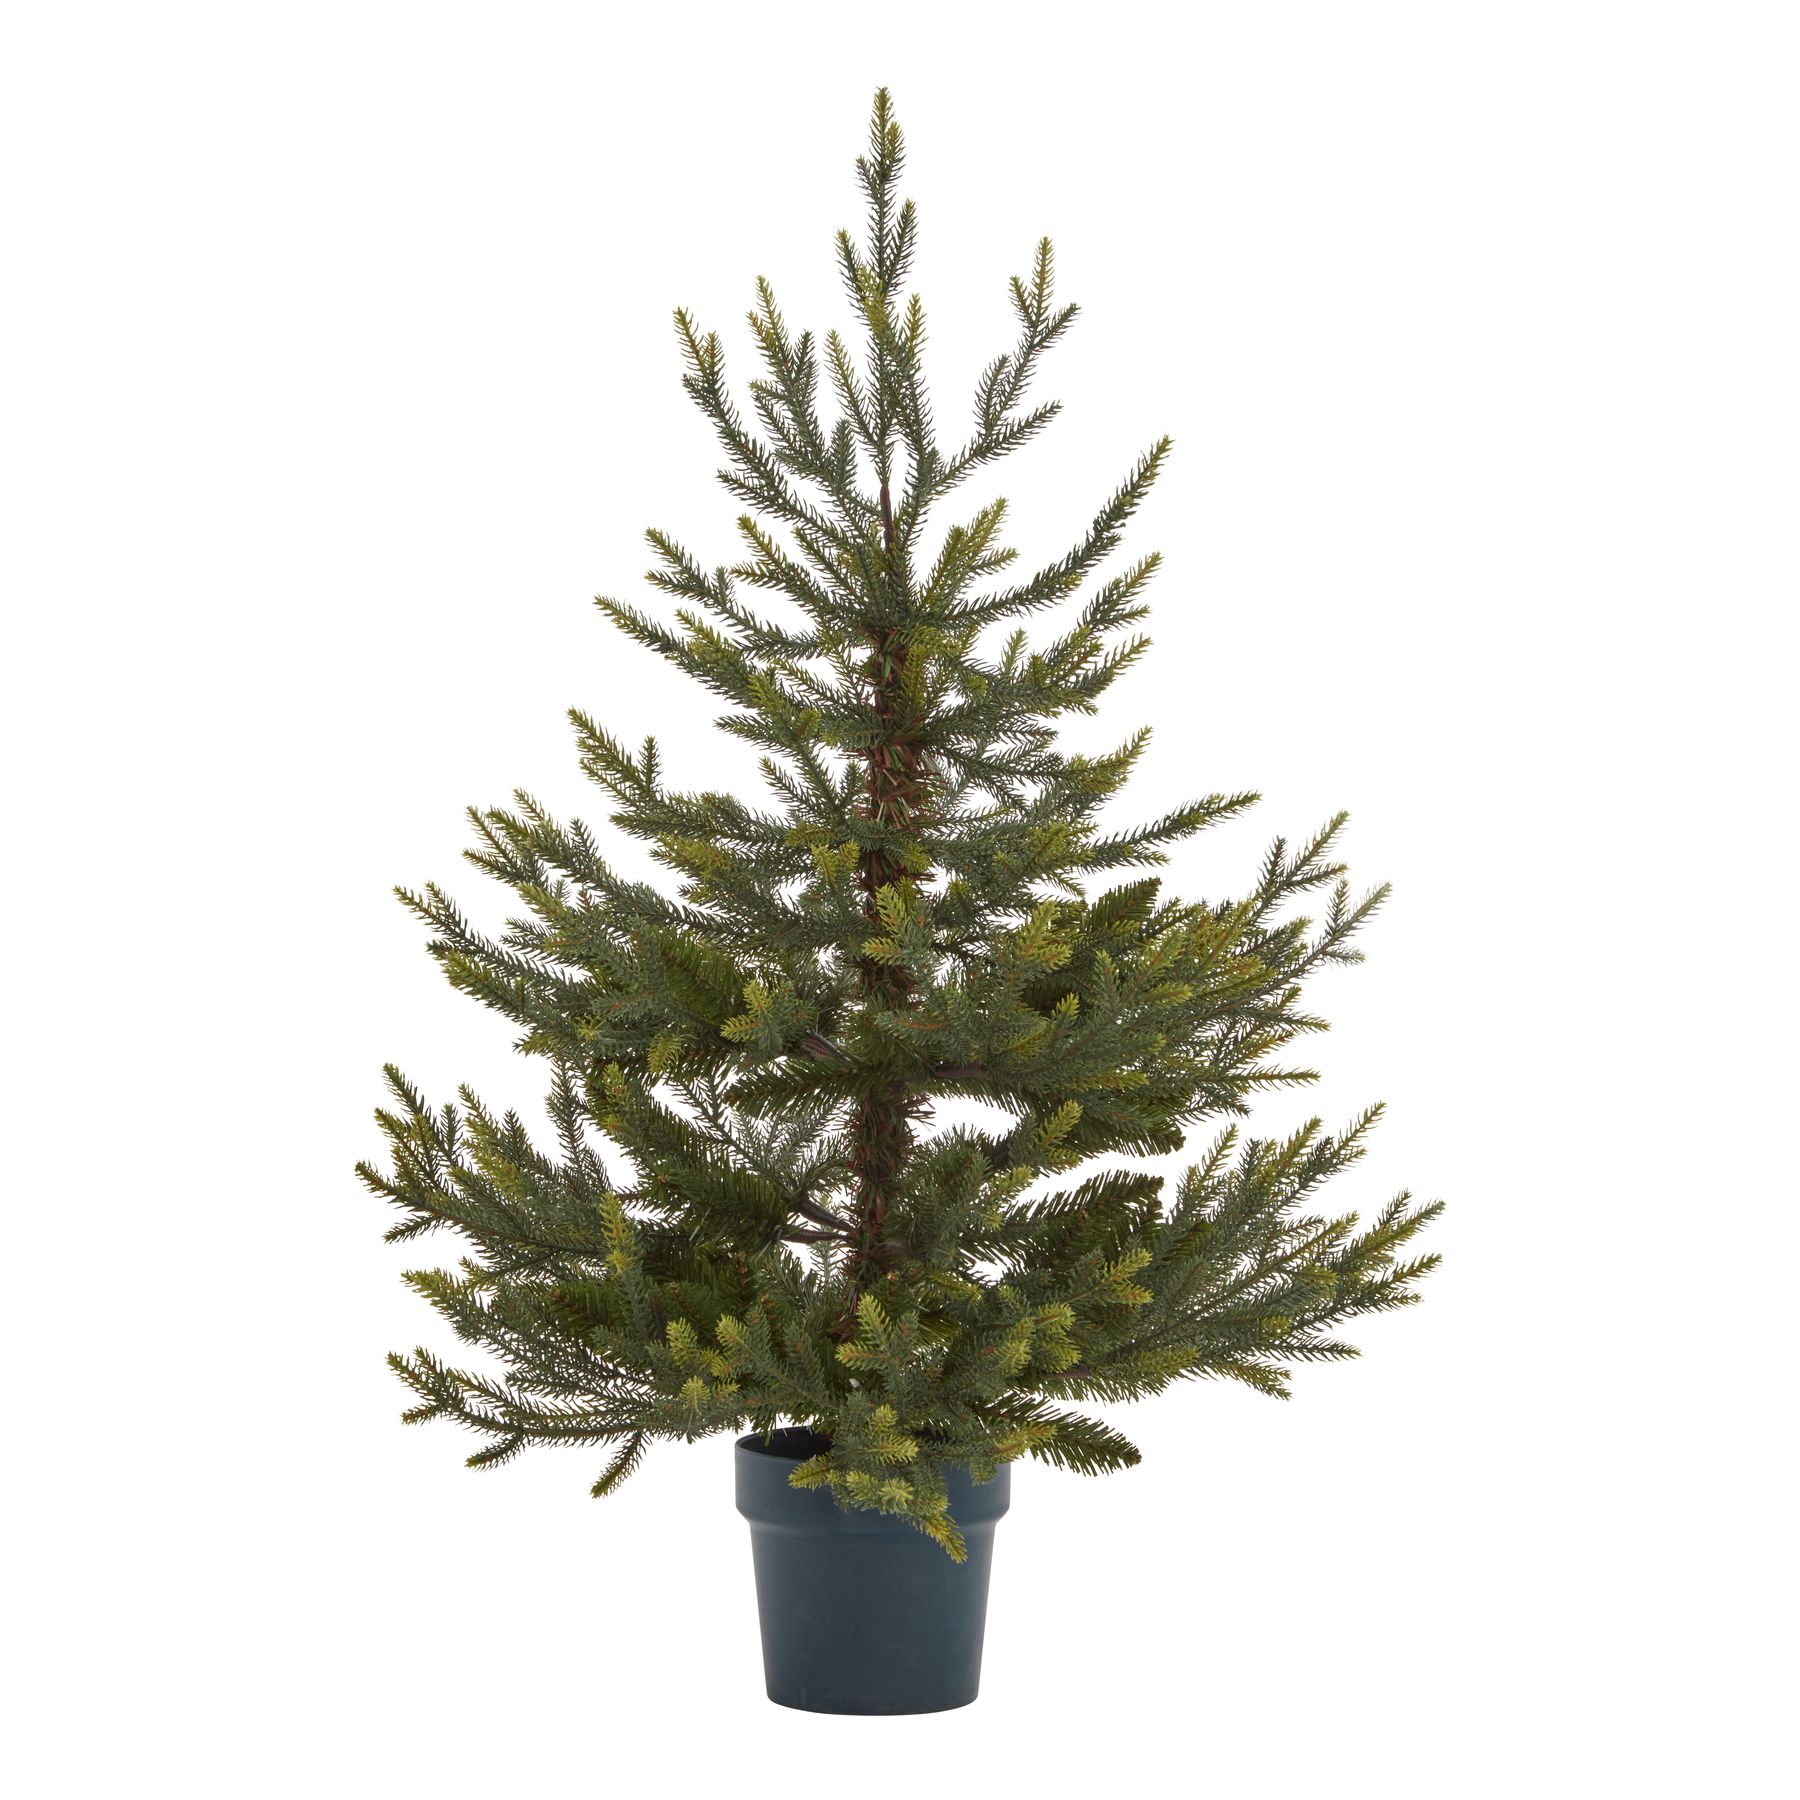 Potted Natural Pine Tree - Image 1